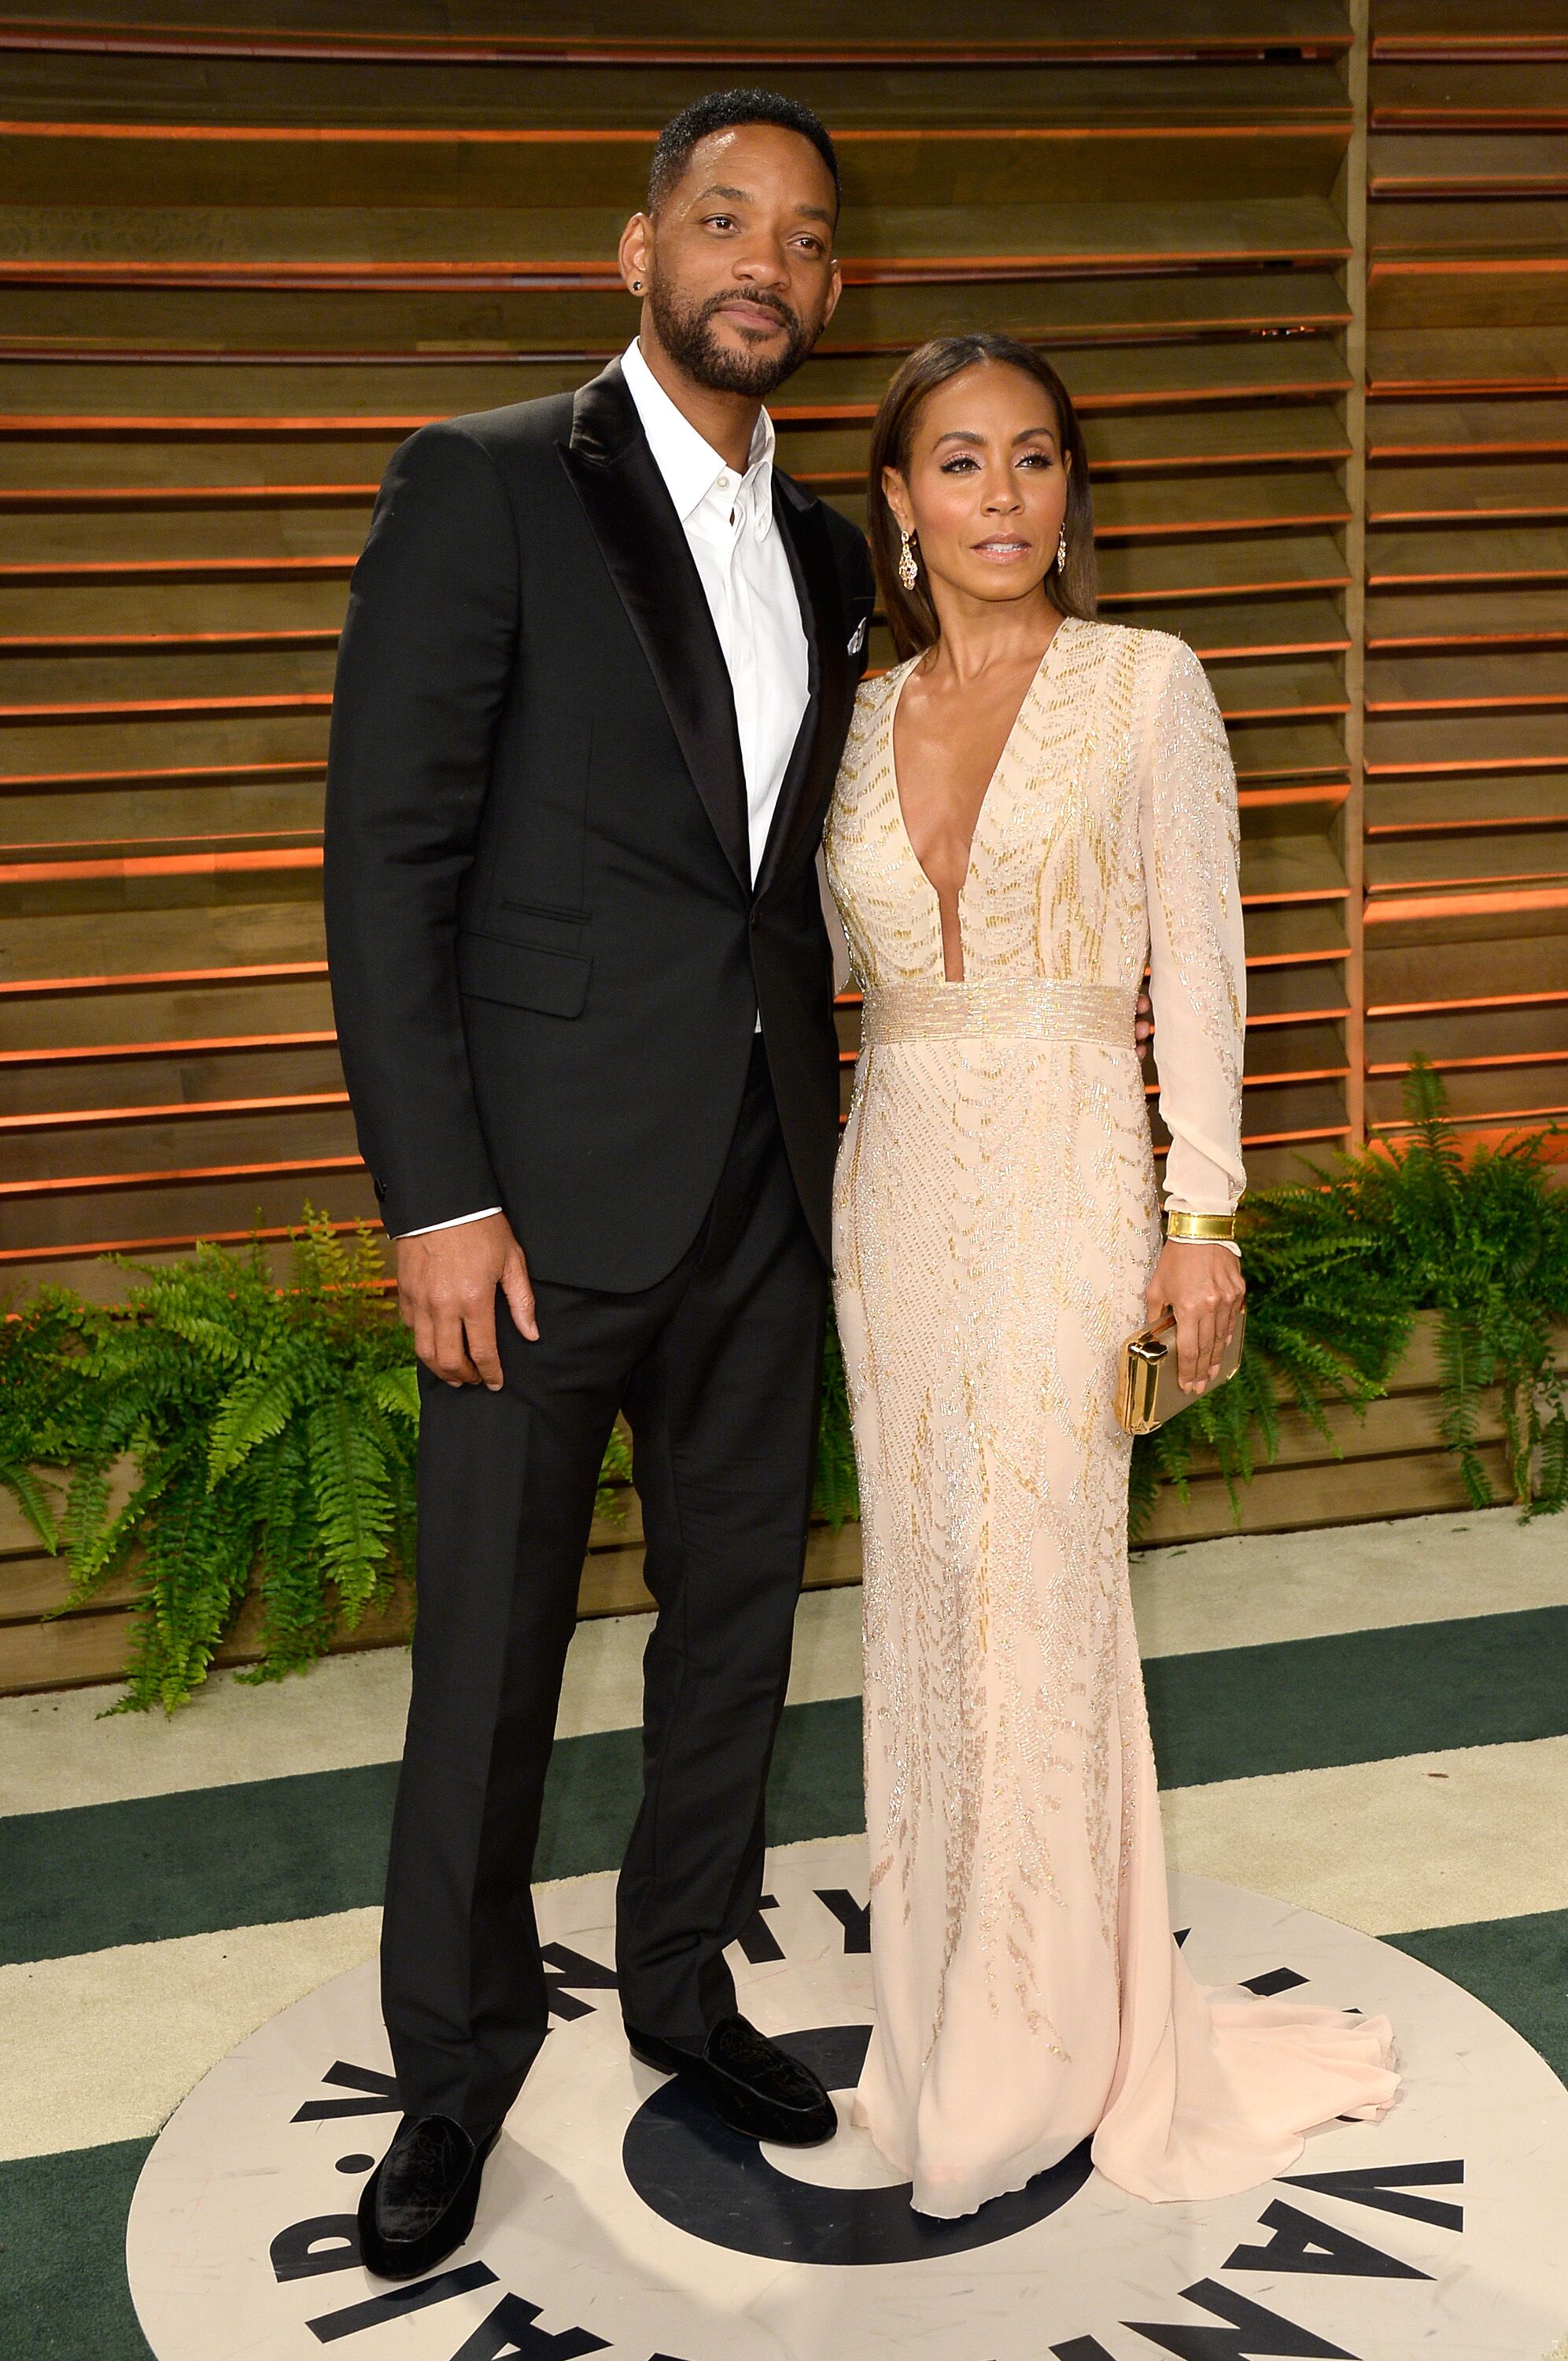  Will Smith and Jada Pinkett Smith at the Vanity Fair Oscar Party in March 2014. | Photo: Getty Images